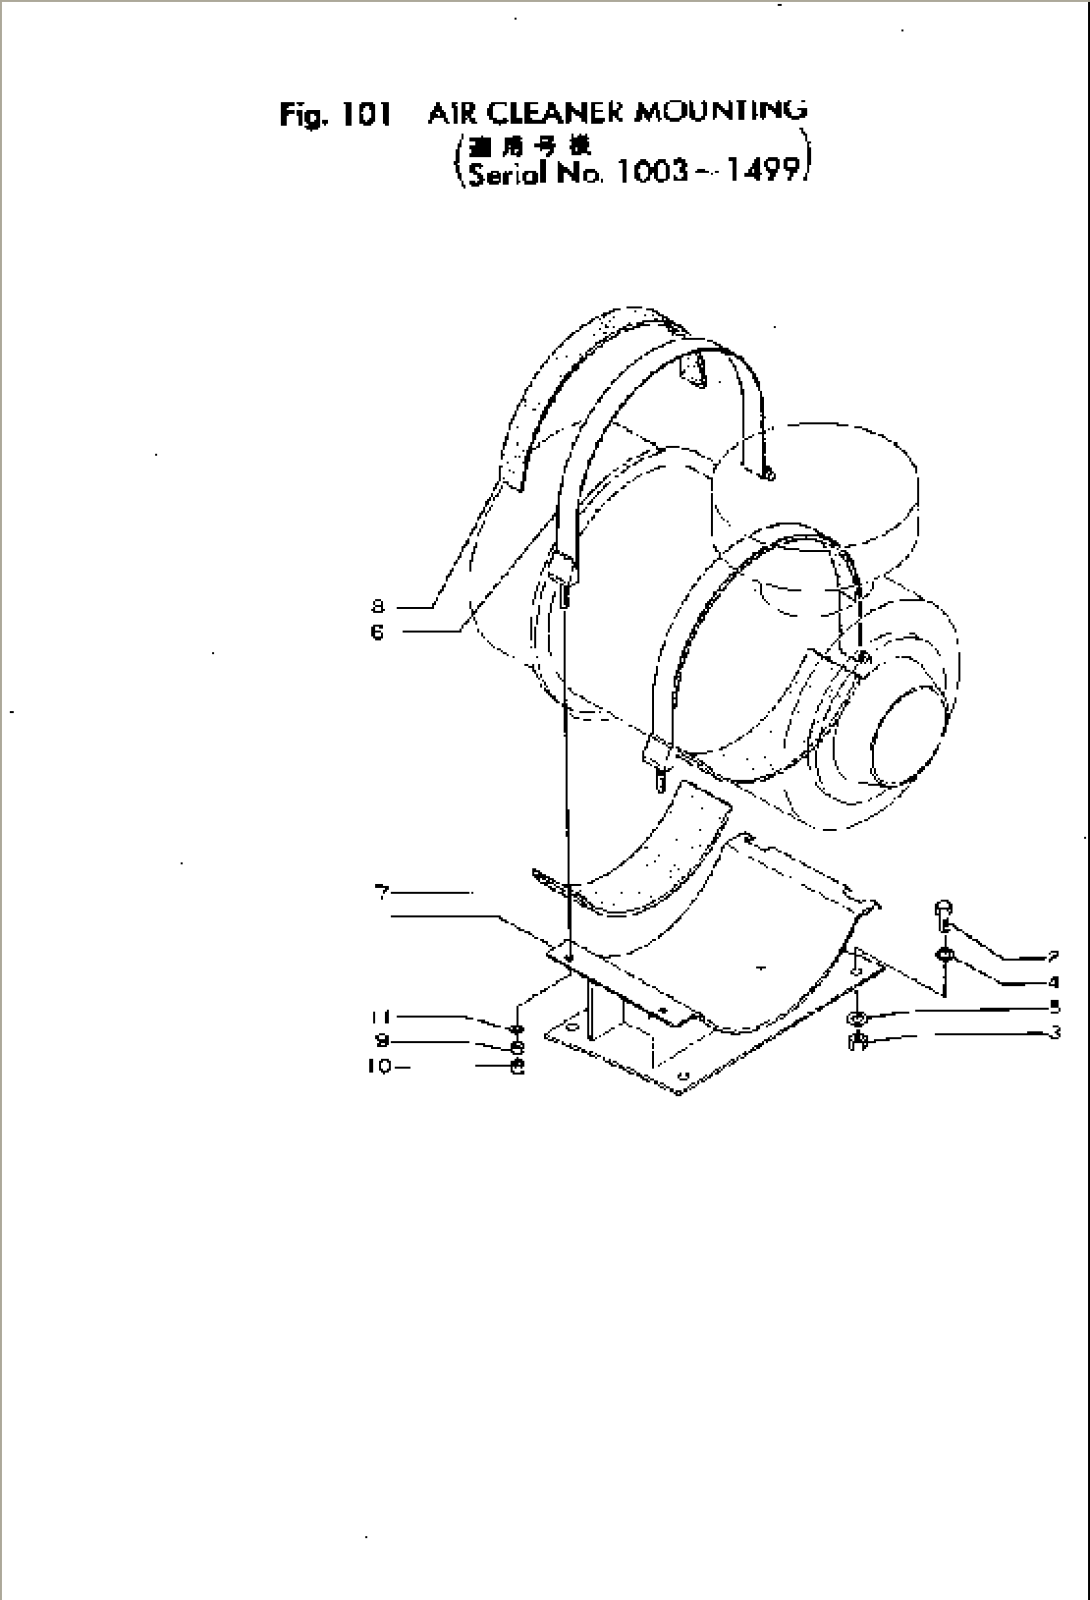 AIR CLEANER MOUNTING